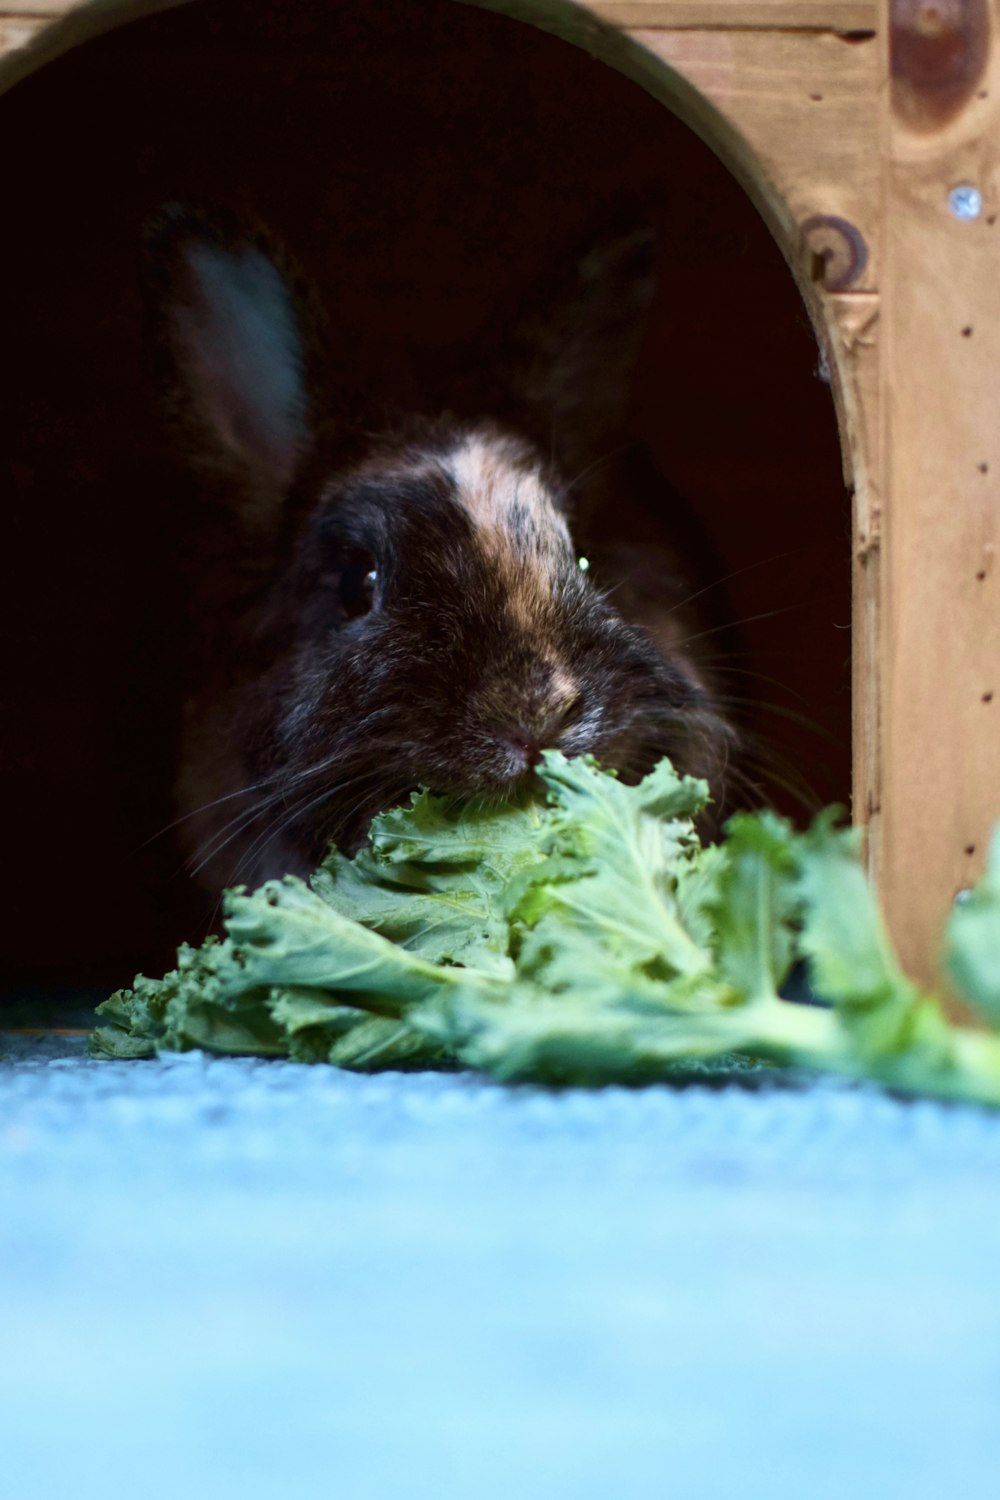 a black and brown rabbit eating some lettuce